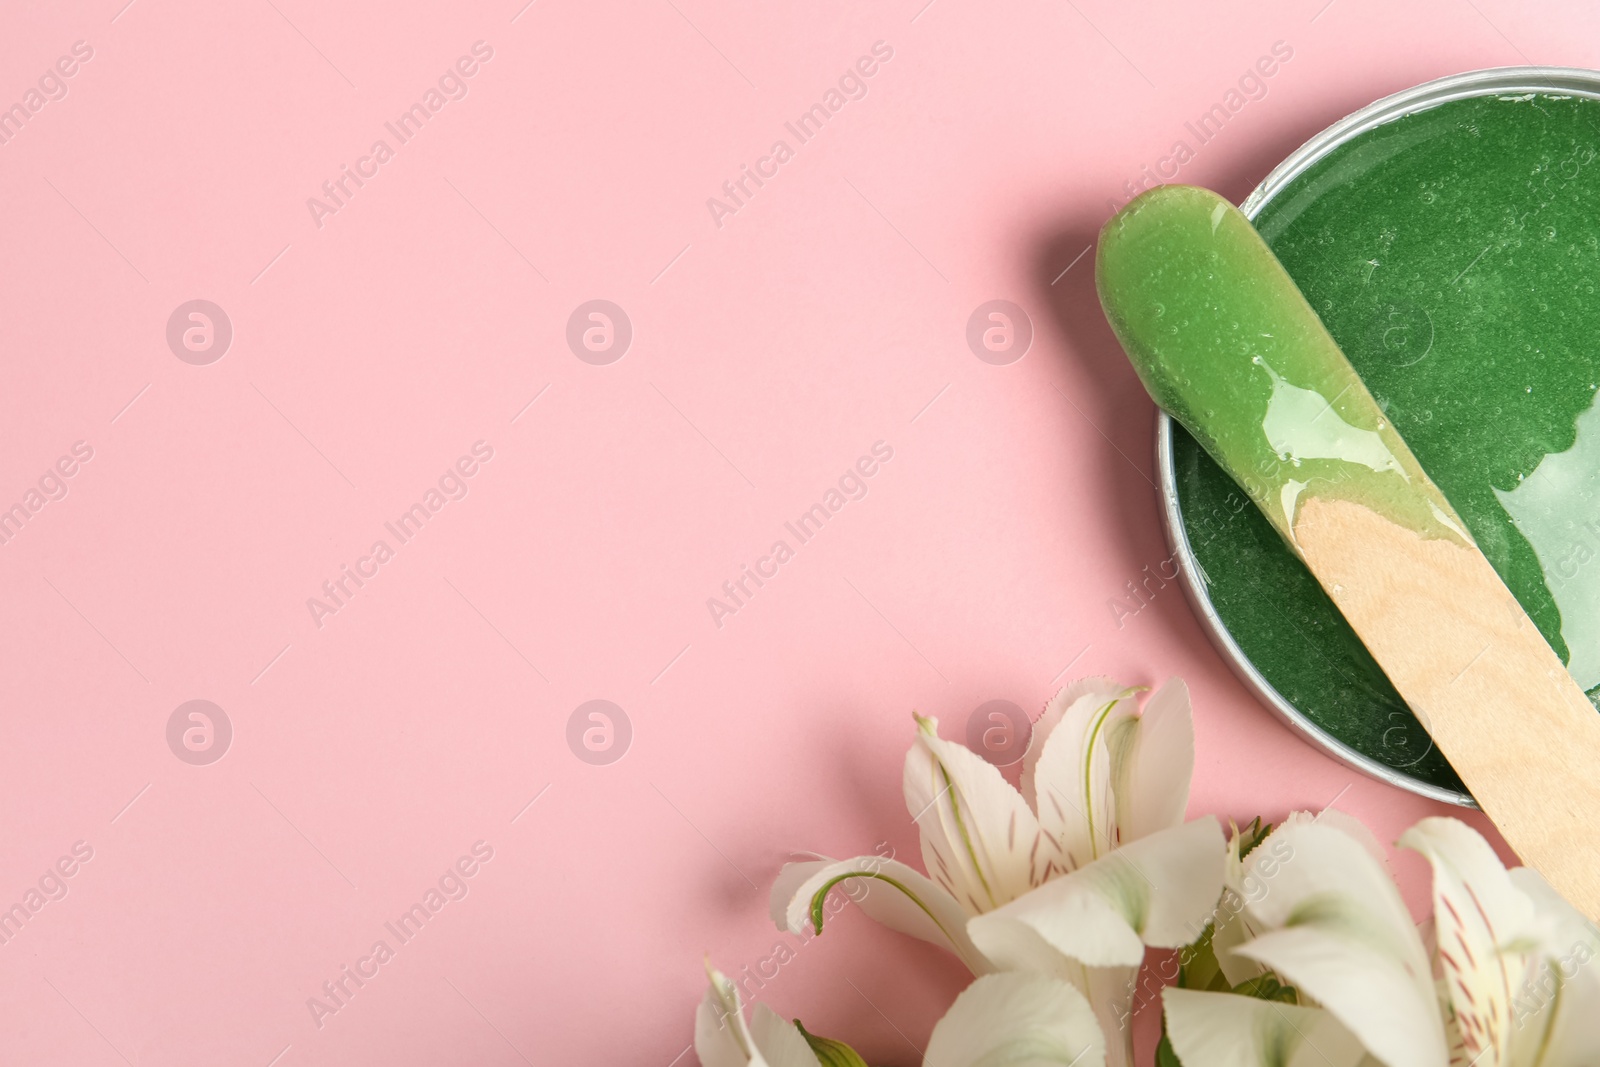 Photo of Wooden spatula, hot depilatory wax and flowers on light pink background, flat lay. Space for text